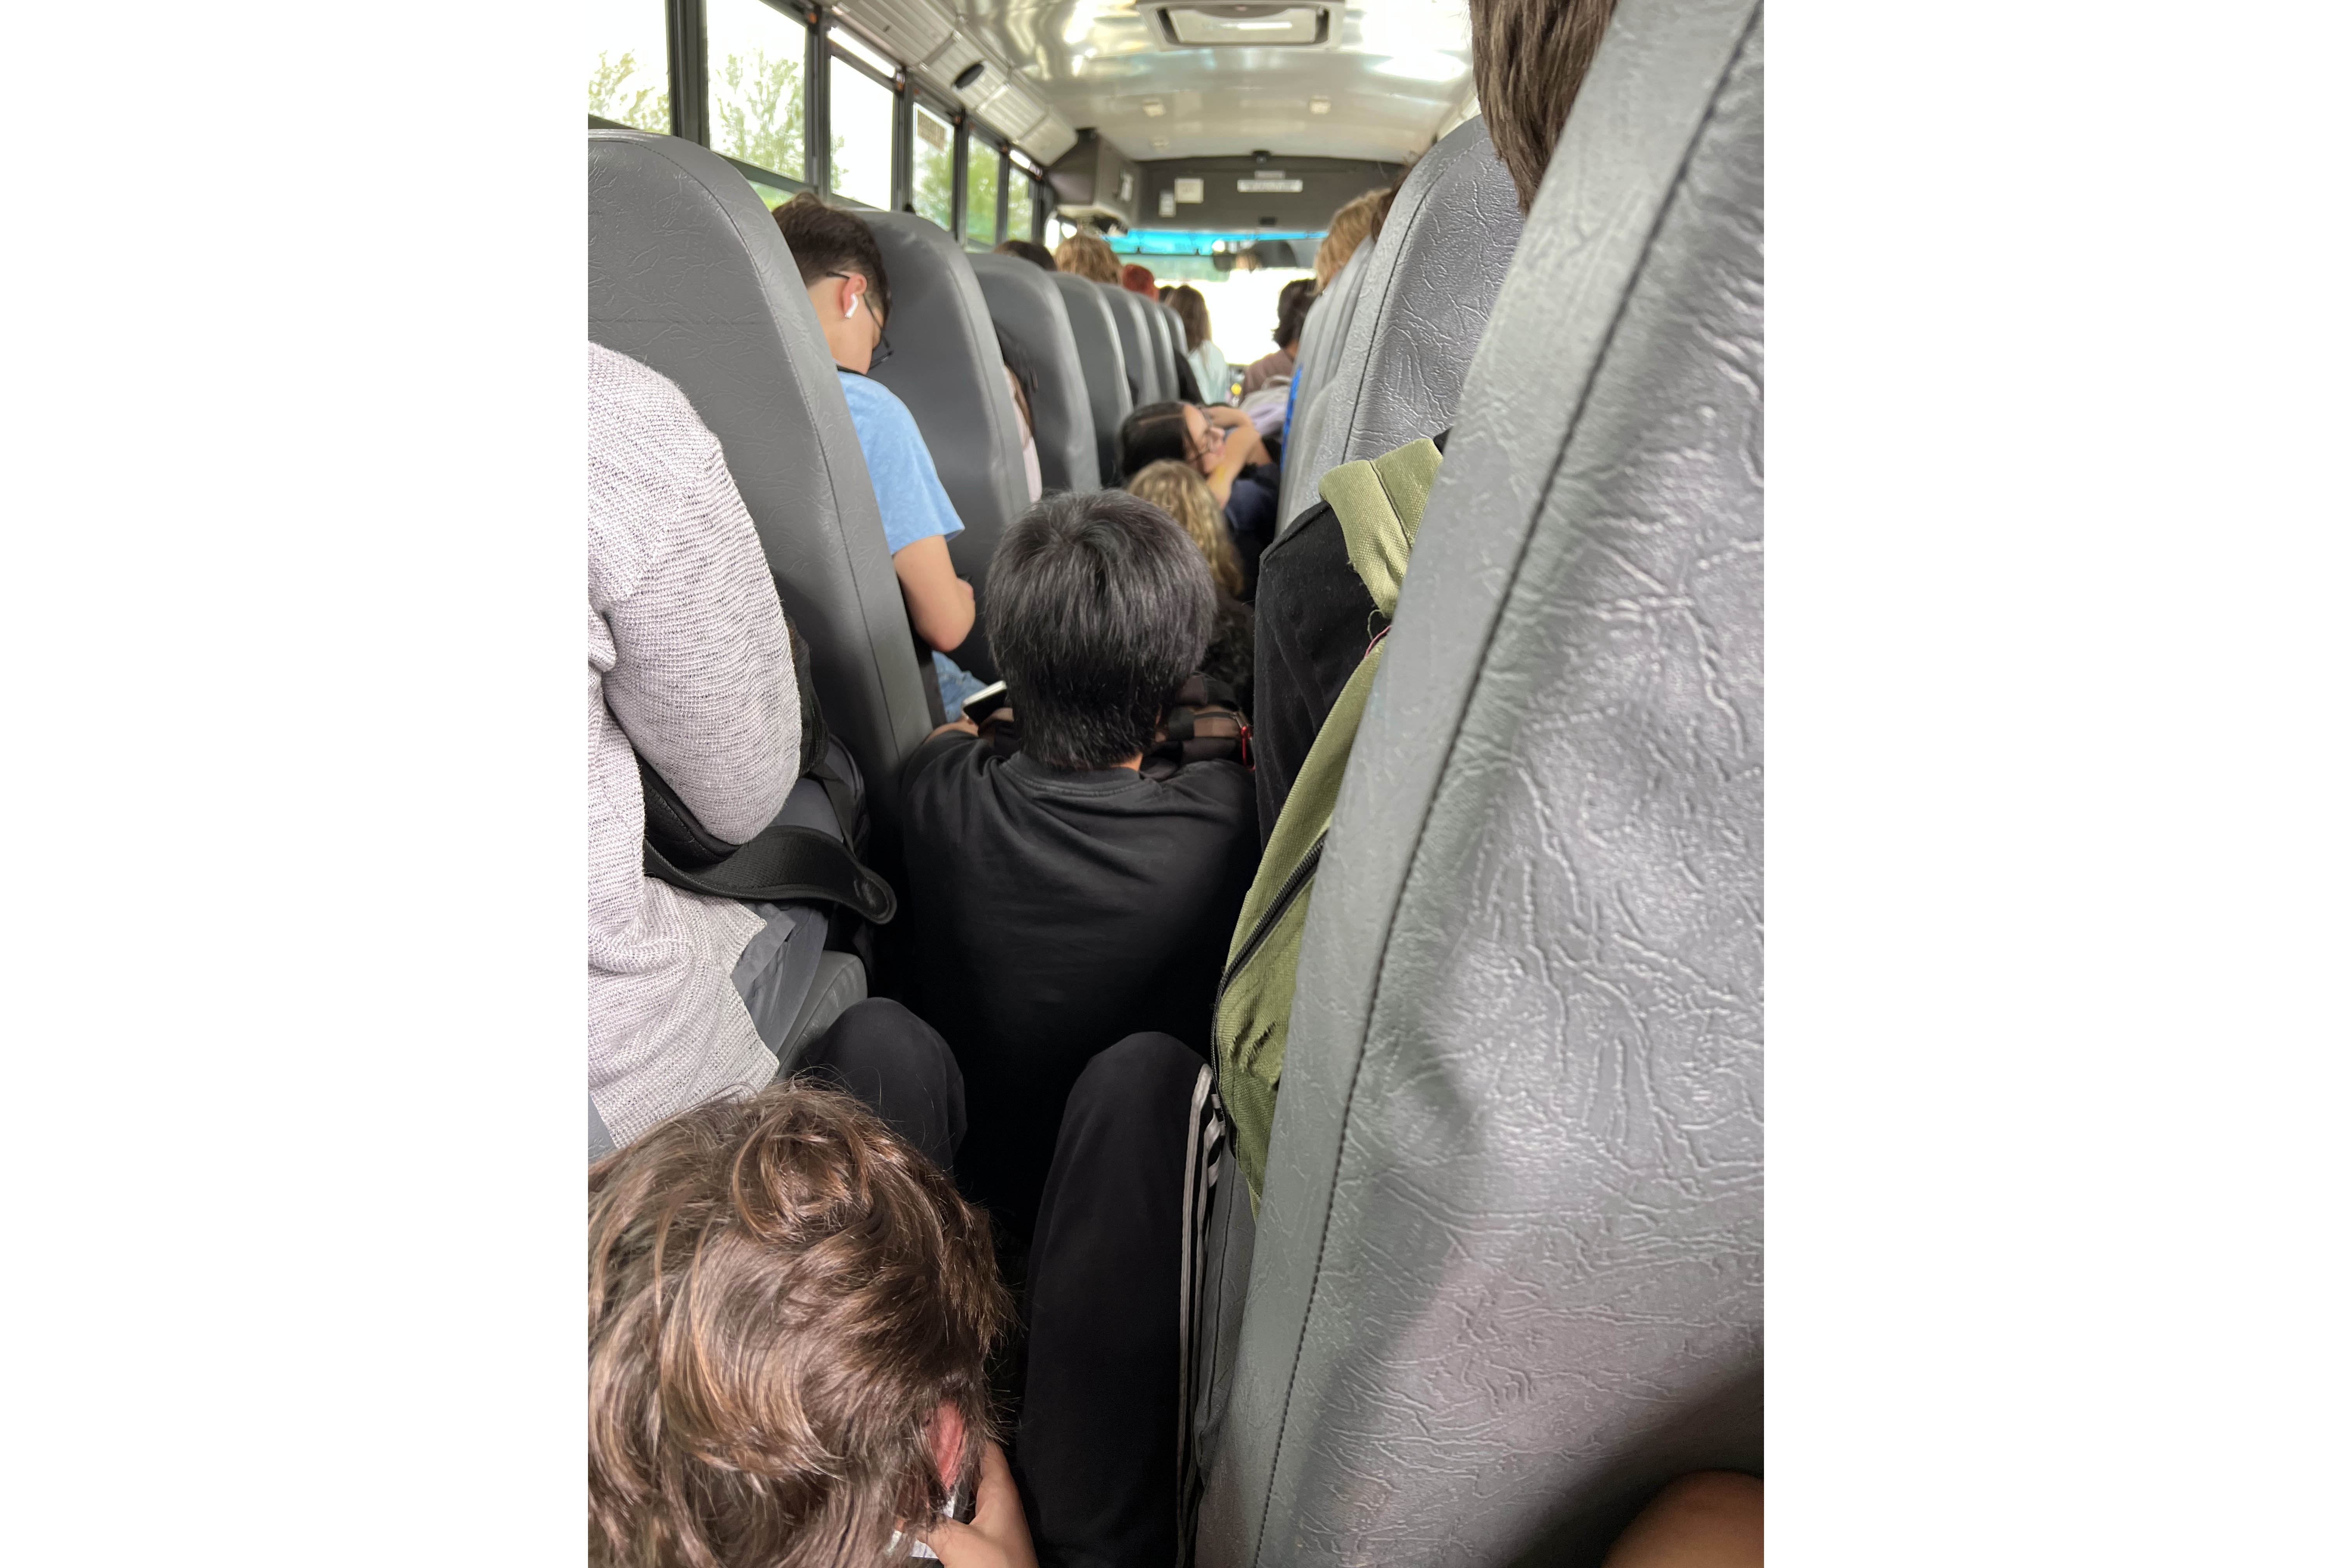 A cell phone image showing students sitting in the aisle of an MCCSC school bus.